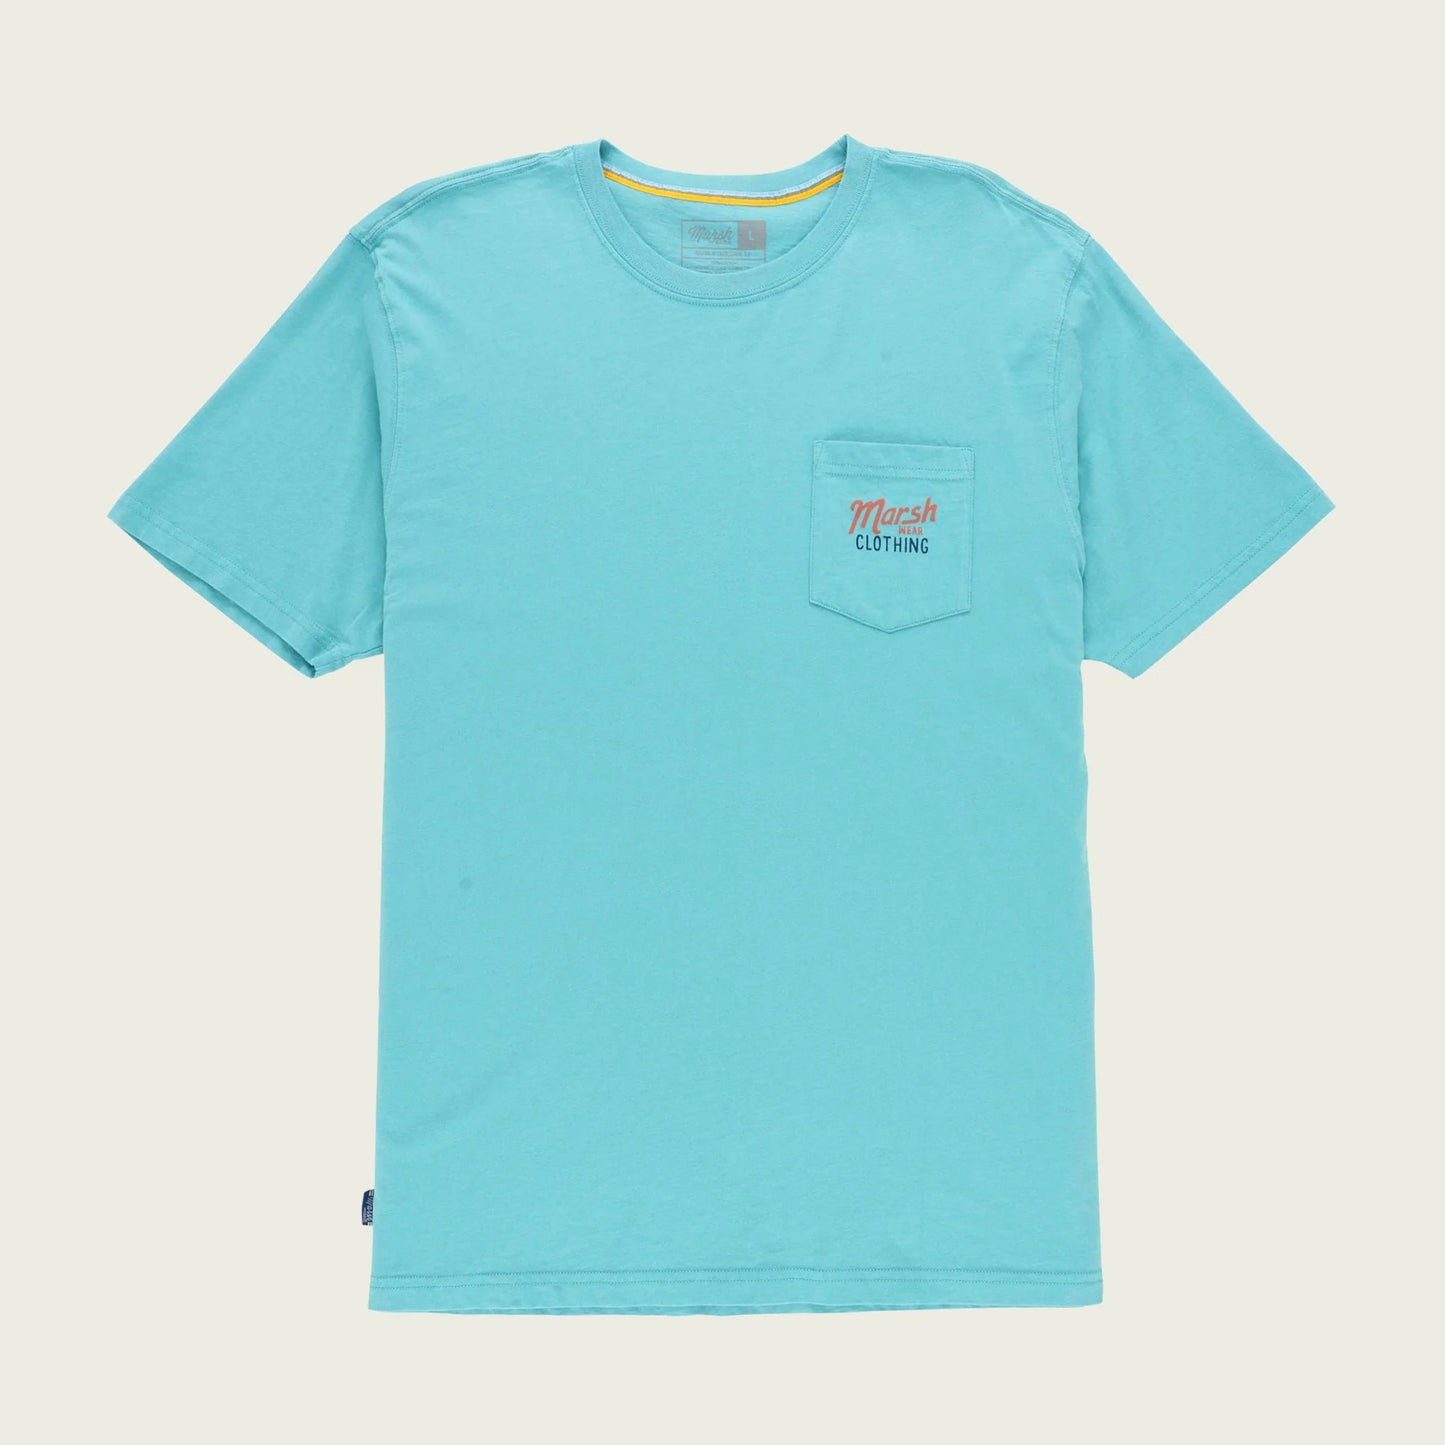 Marsh Wear State of Mind SS Shirt Dusty Turquoise